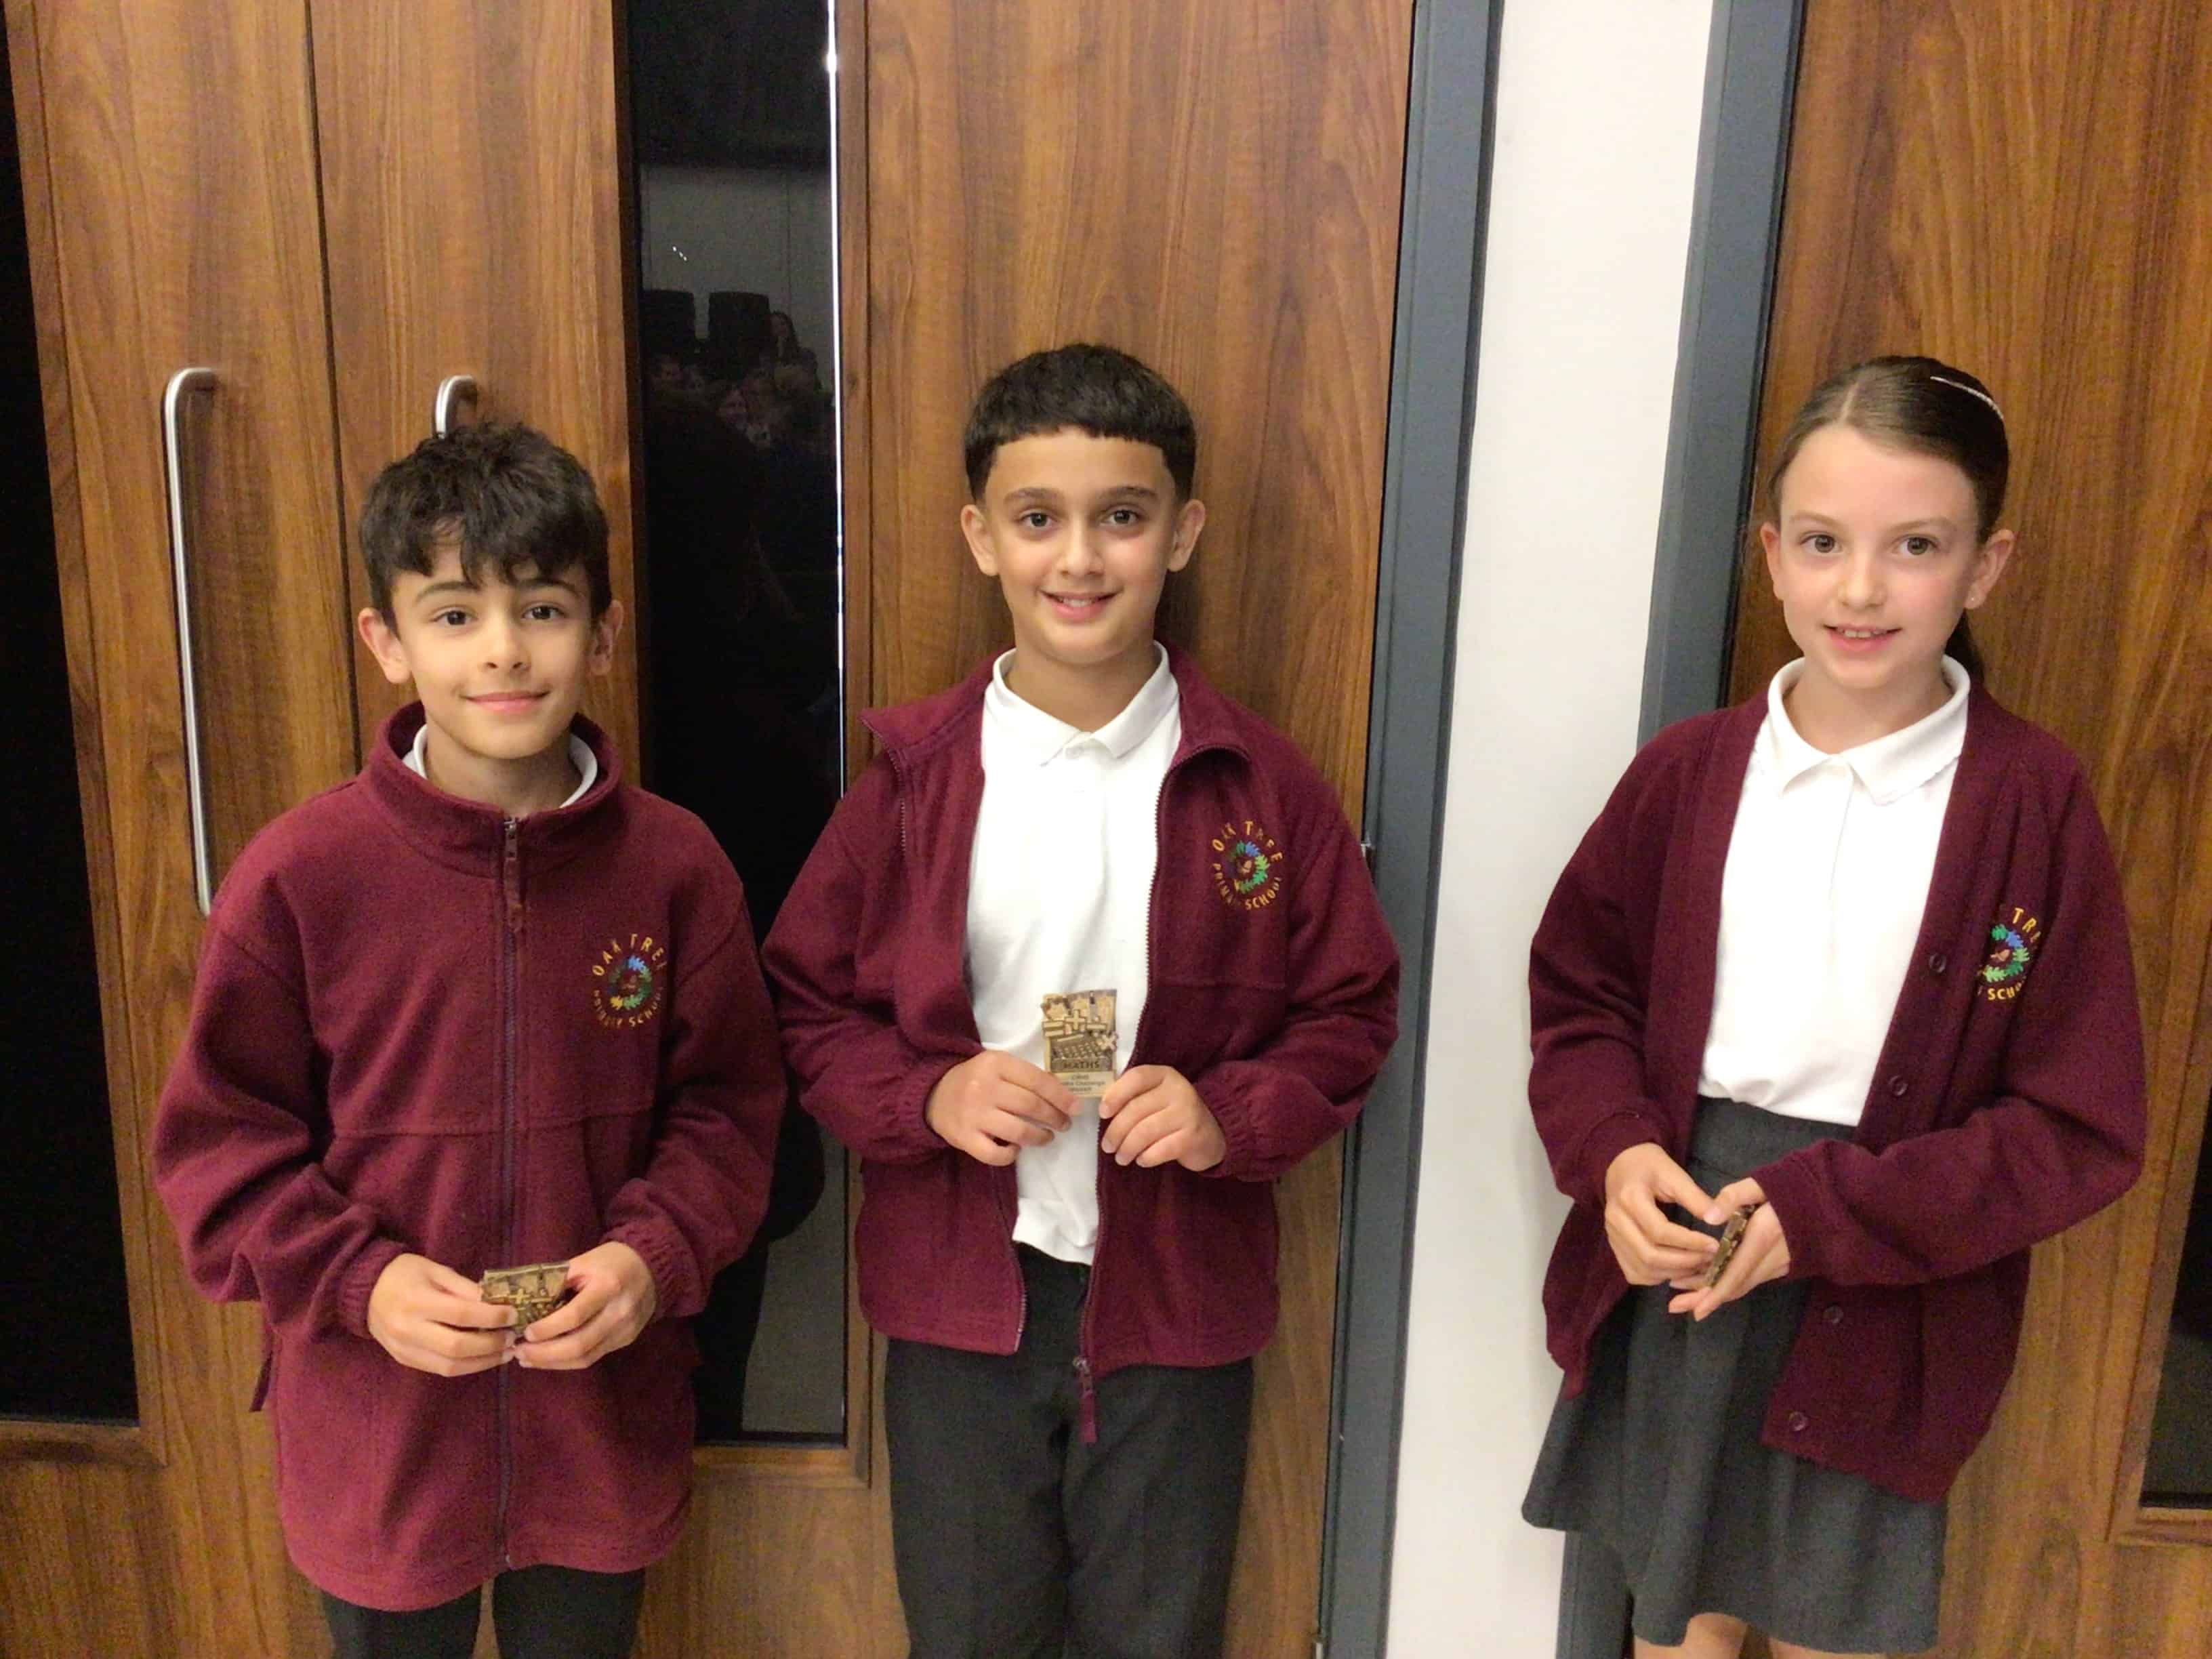 The winning pupils from Oak Tree Primary School smile with their CHHS Maths Award magnets that they earned at the Cheadle Hulme High School Maths Award Evening.